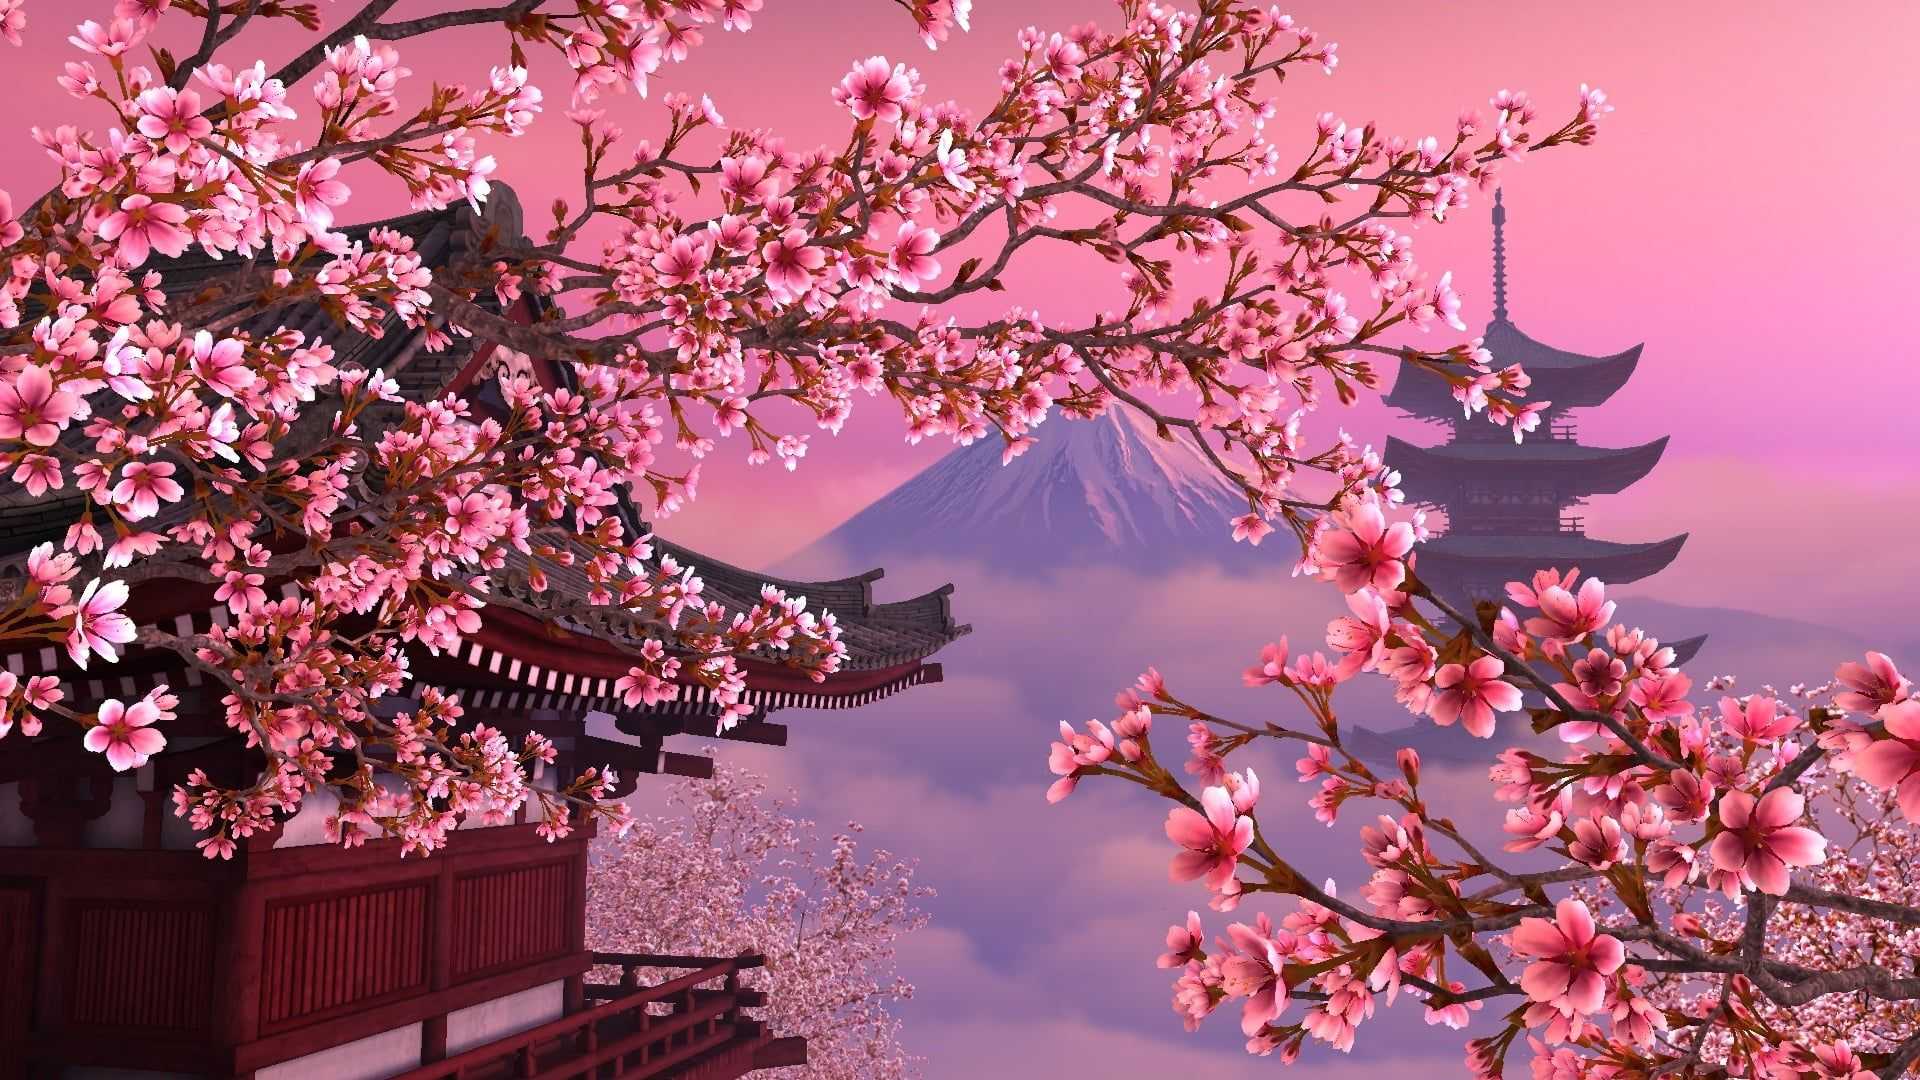 Blossom Tree Aesthetic Wallpapers Wallpaper Cave